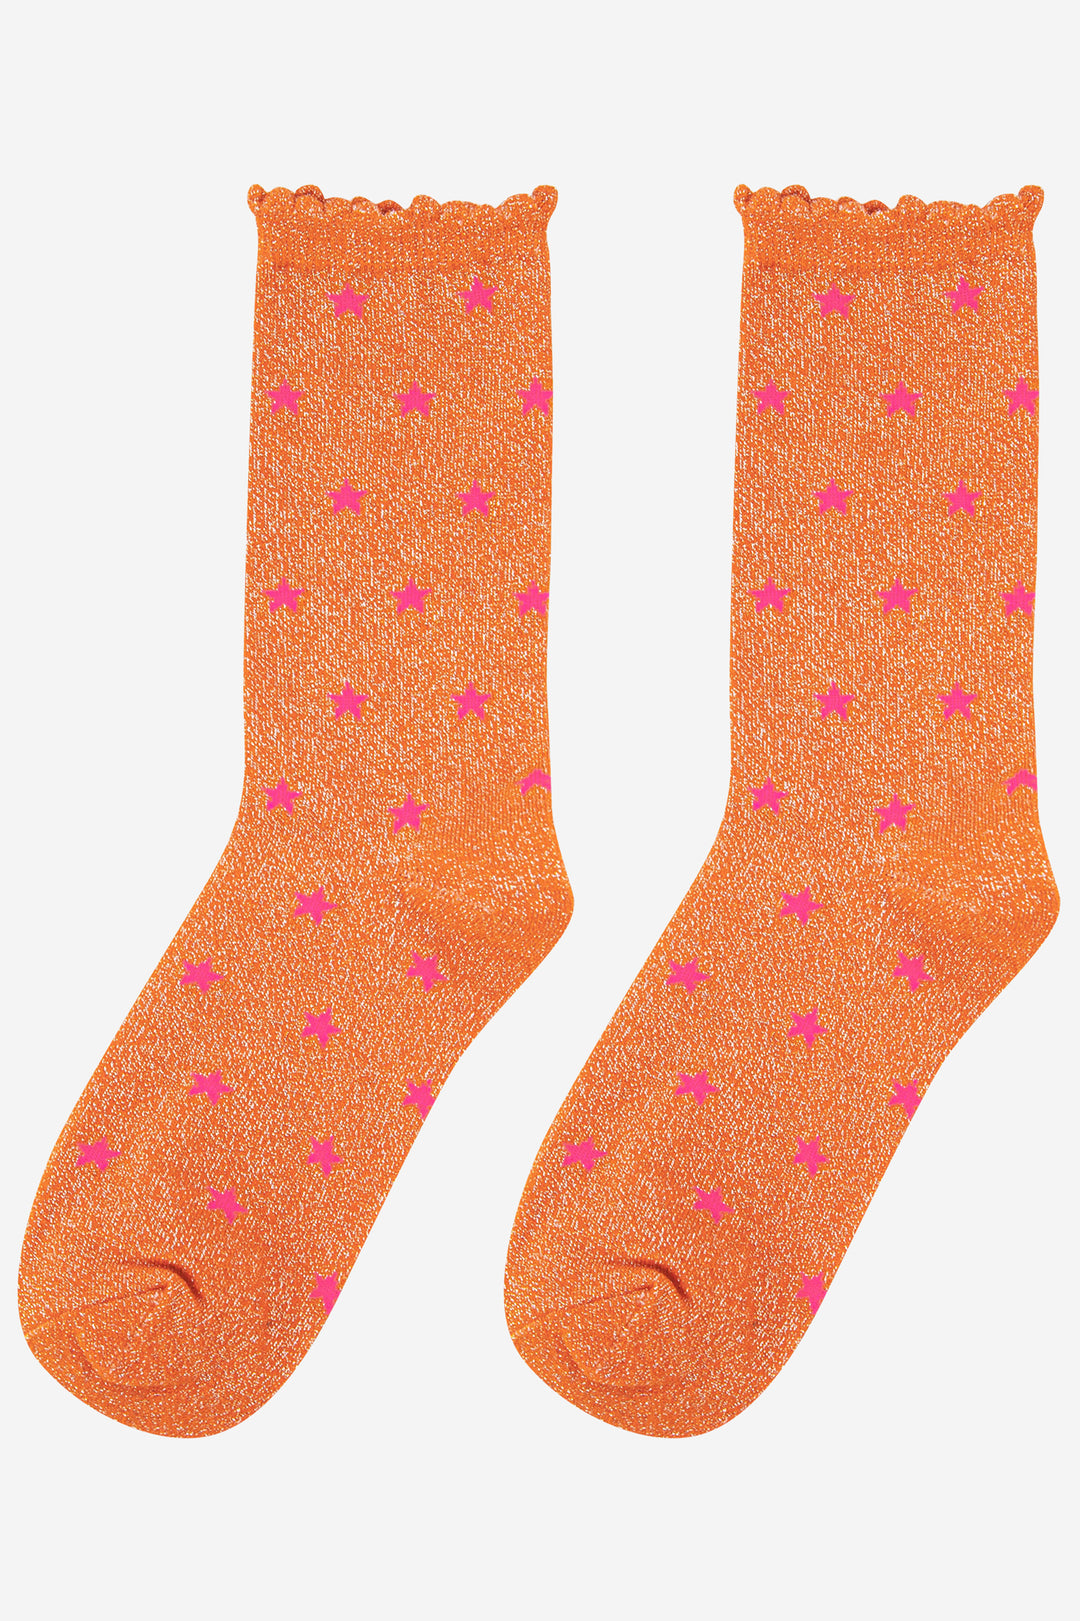 orange glitter ankle socks with scalloped edges and an all over pink star pattern